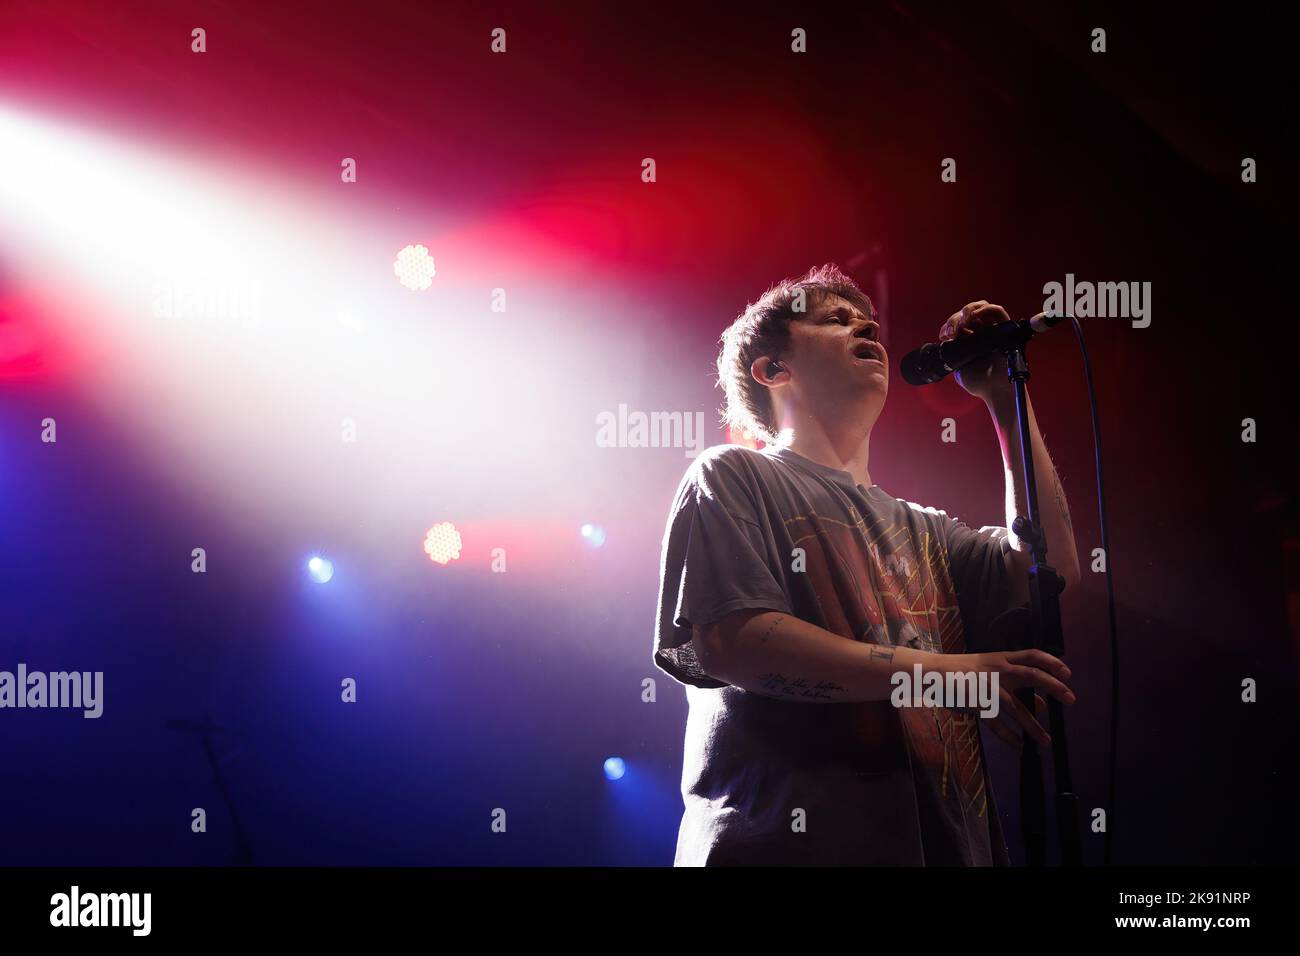 BARCELONA - APR 25: Nothing But Thieves (indie metal rock band) perform on stage at Razzmatazz on April 25, 2022 in Barcelona, Spain. Stock Photo